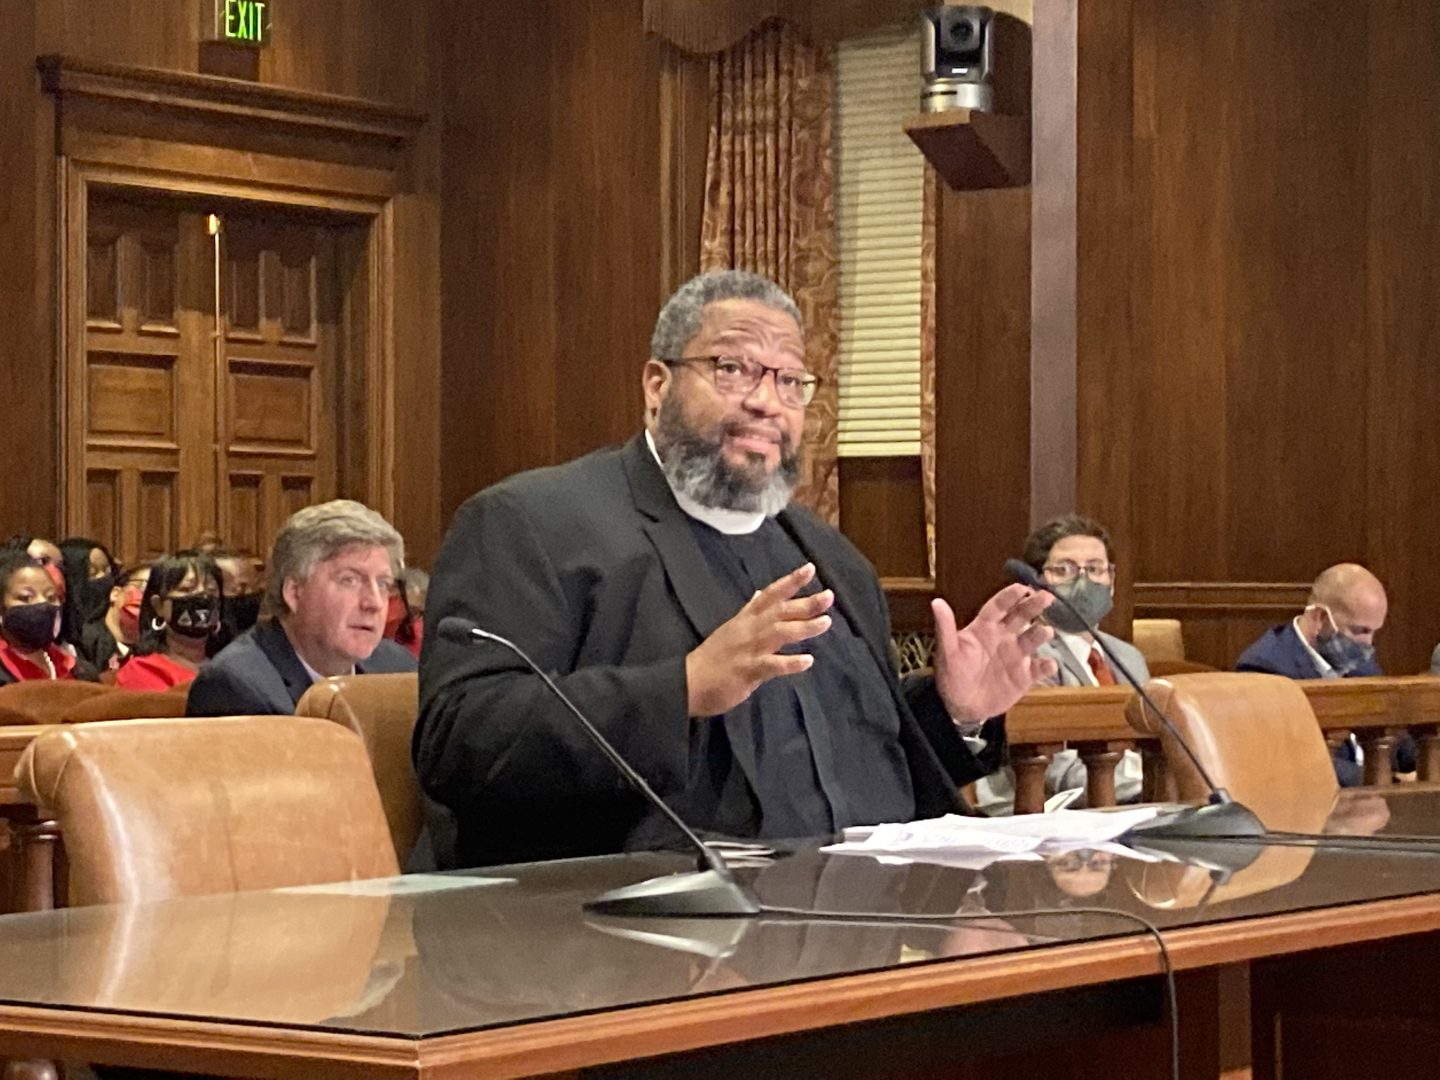 Bishop Dwayne Royster, executive director of Interfaith advocacy group POWER in Philadelphia, testifies during a Legislative Reapportionment Commission meeting on Oct. 13